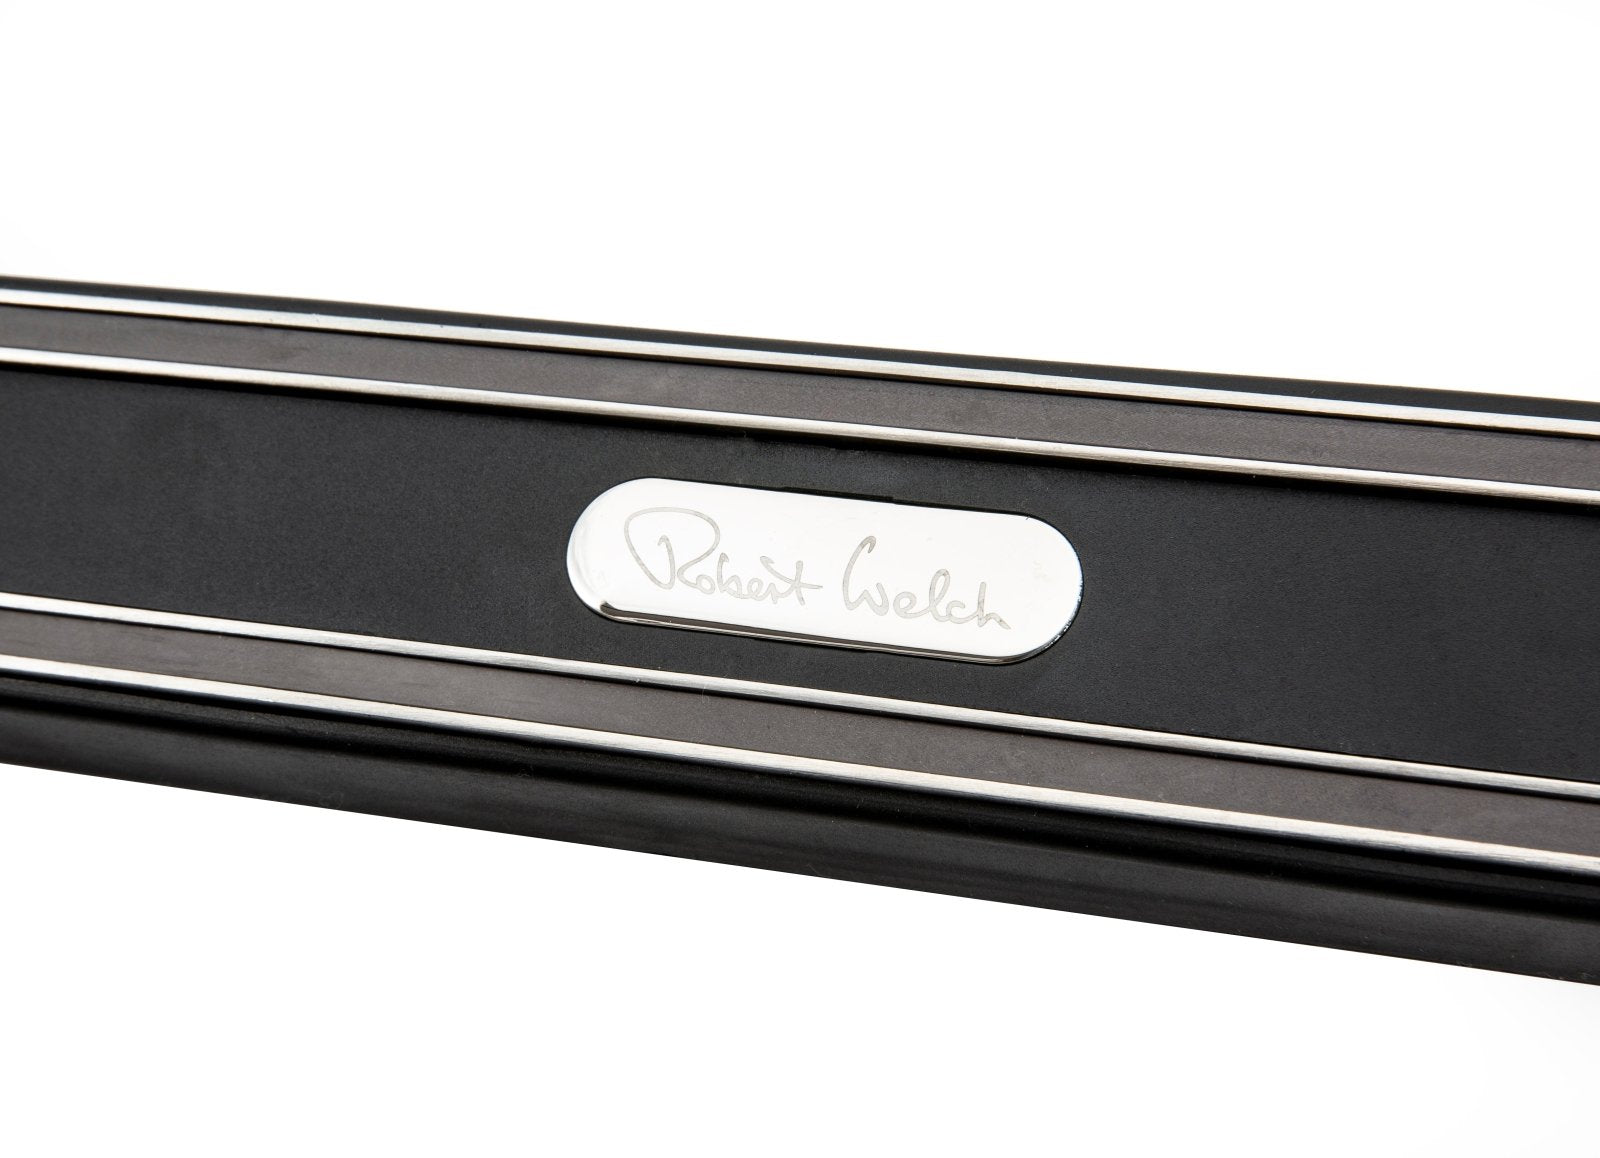 Robert Welch Signature Magnetic Knife Rack - SIGSA2111V - The Cotswold Knife Company